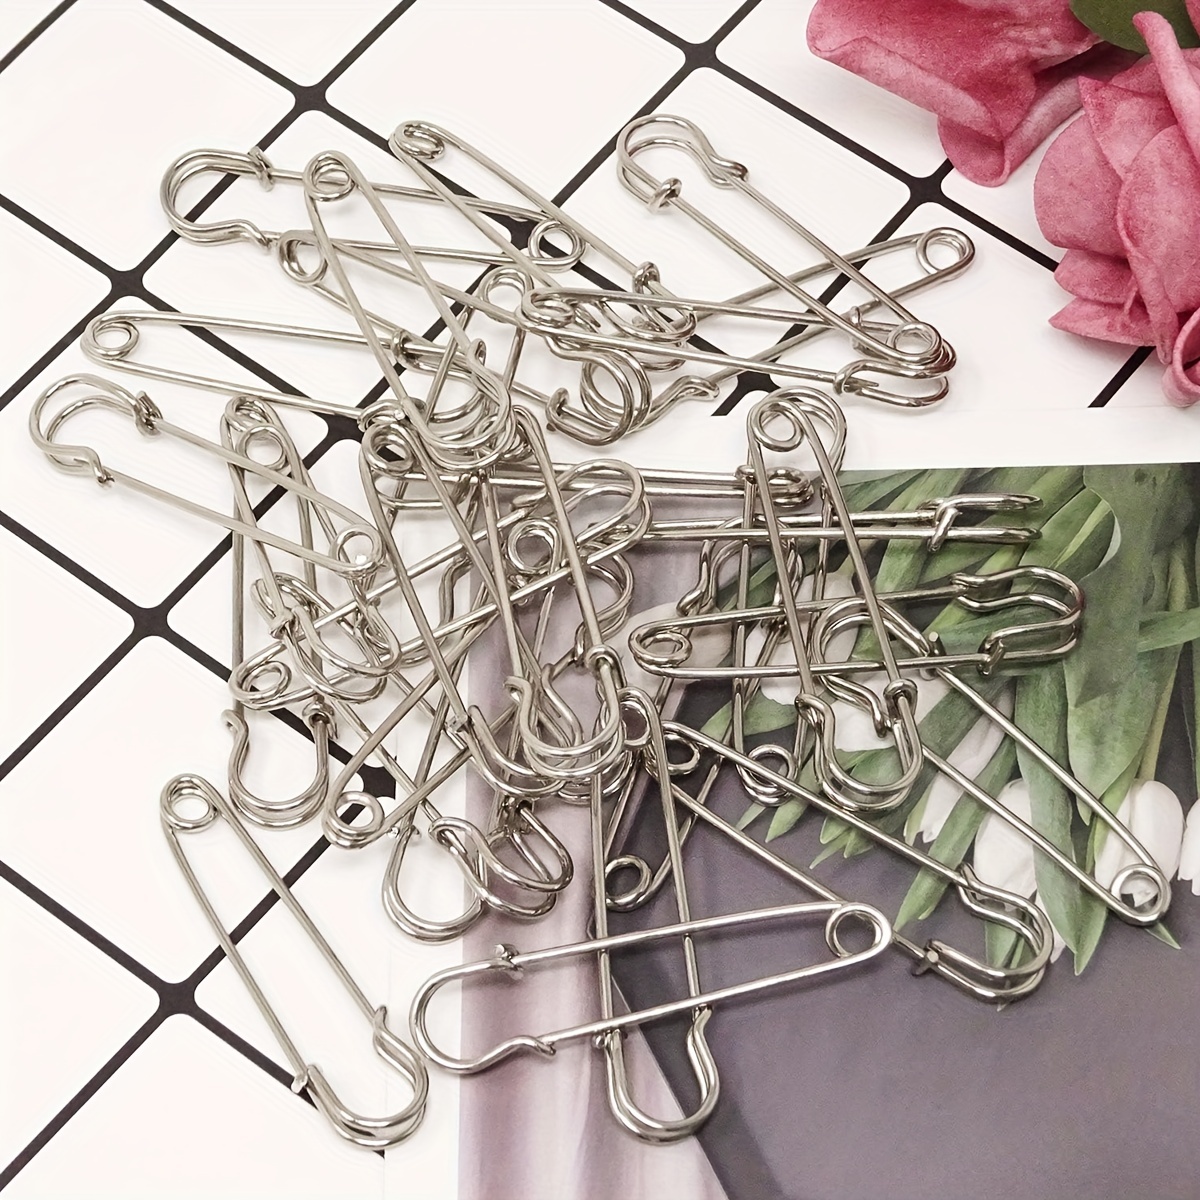  30 Pack Large Safety Pins, 4 Heavy Duty Blanket Pins for All  Kinds of Handicrafts, Clothing, Blankets Upholstery, Laundry and Craft